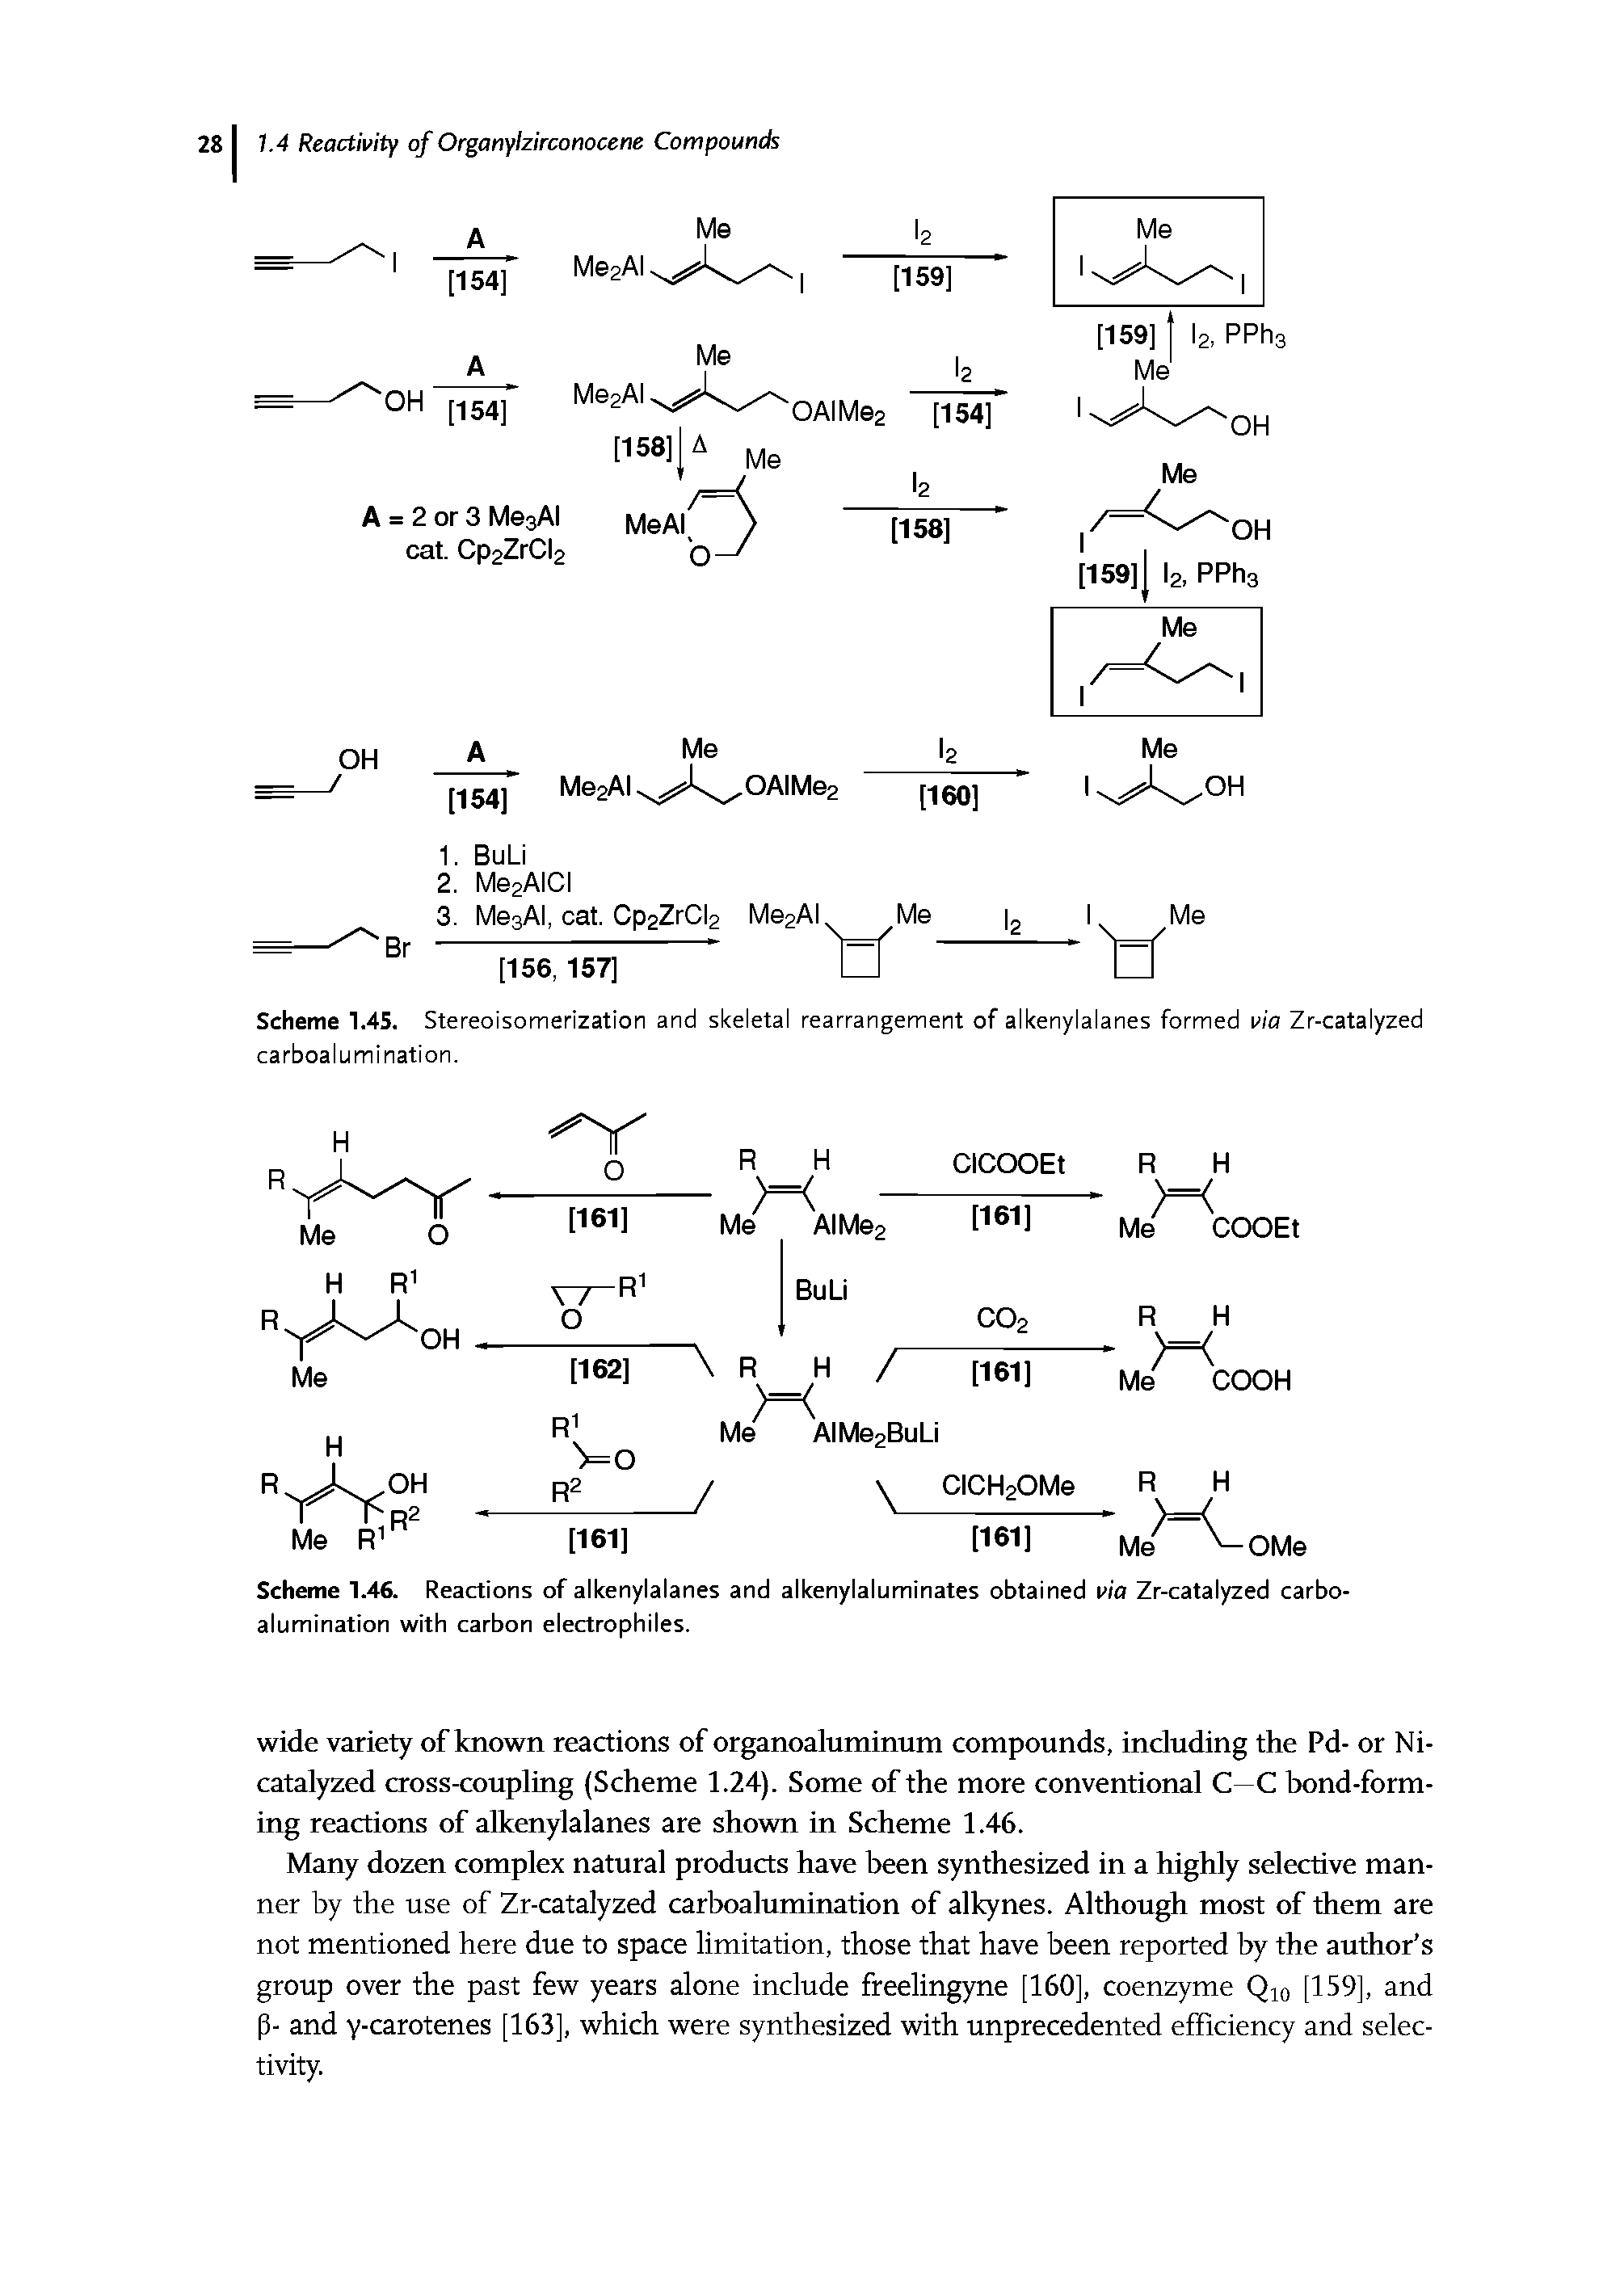 Scheme 1.46. Reactions of alkenylalanes and alkenylaluminates obtained via Zr-catalyzed carboalumination with carbon electrophiles.